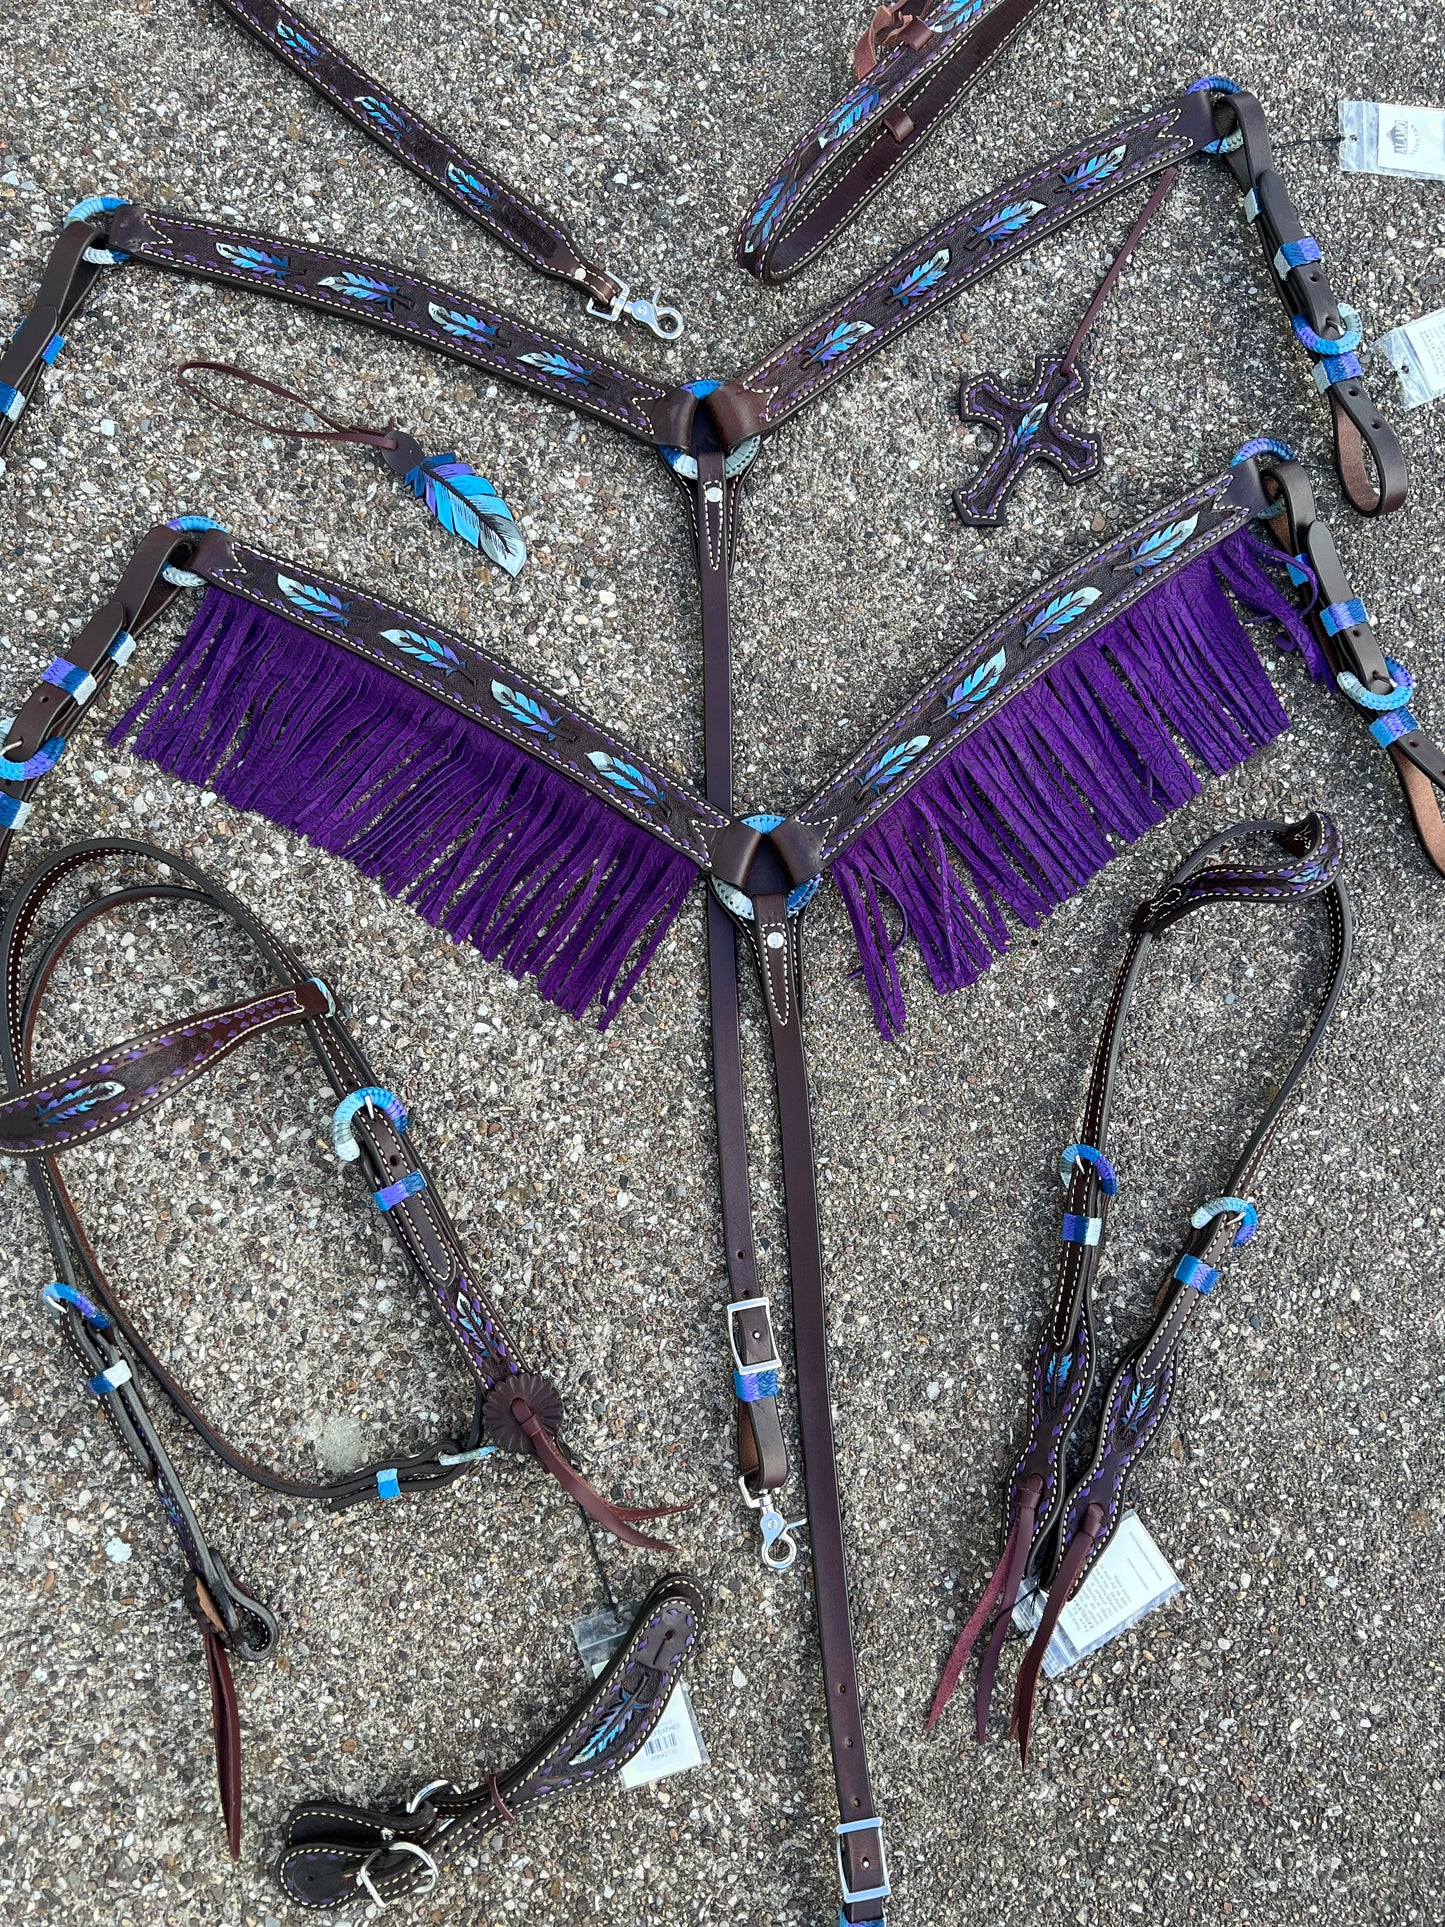 3F23-FEATHER 1-3/4" Contour breast collar chocolate leather multicolored tooled with purple buckstitch & Fringe & Spanish lace hardware